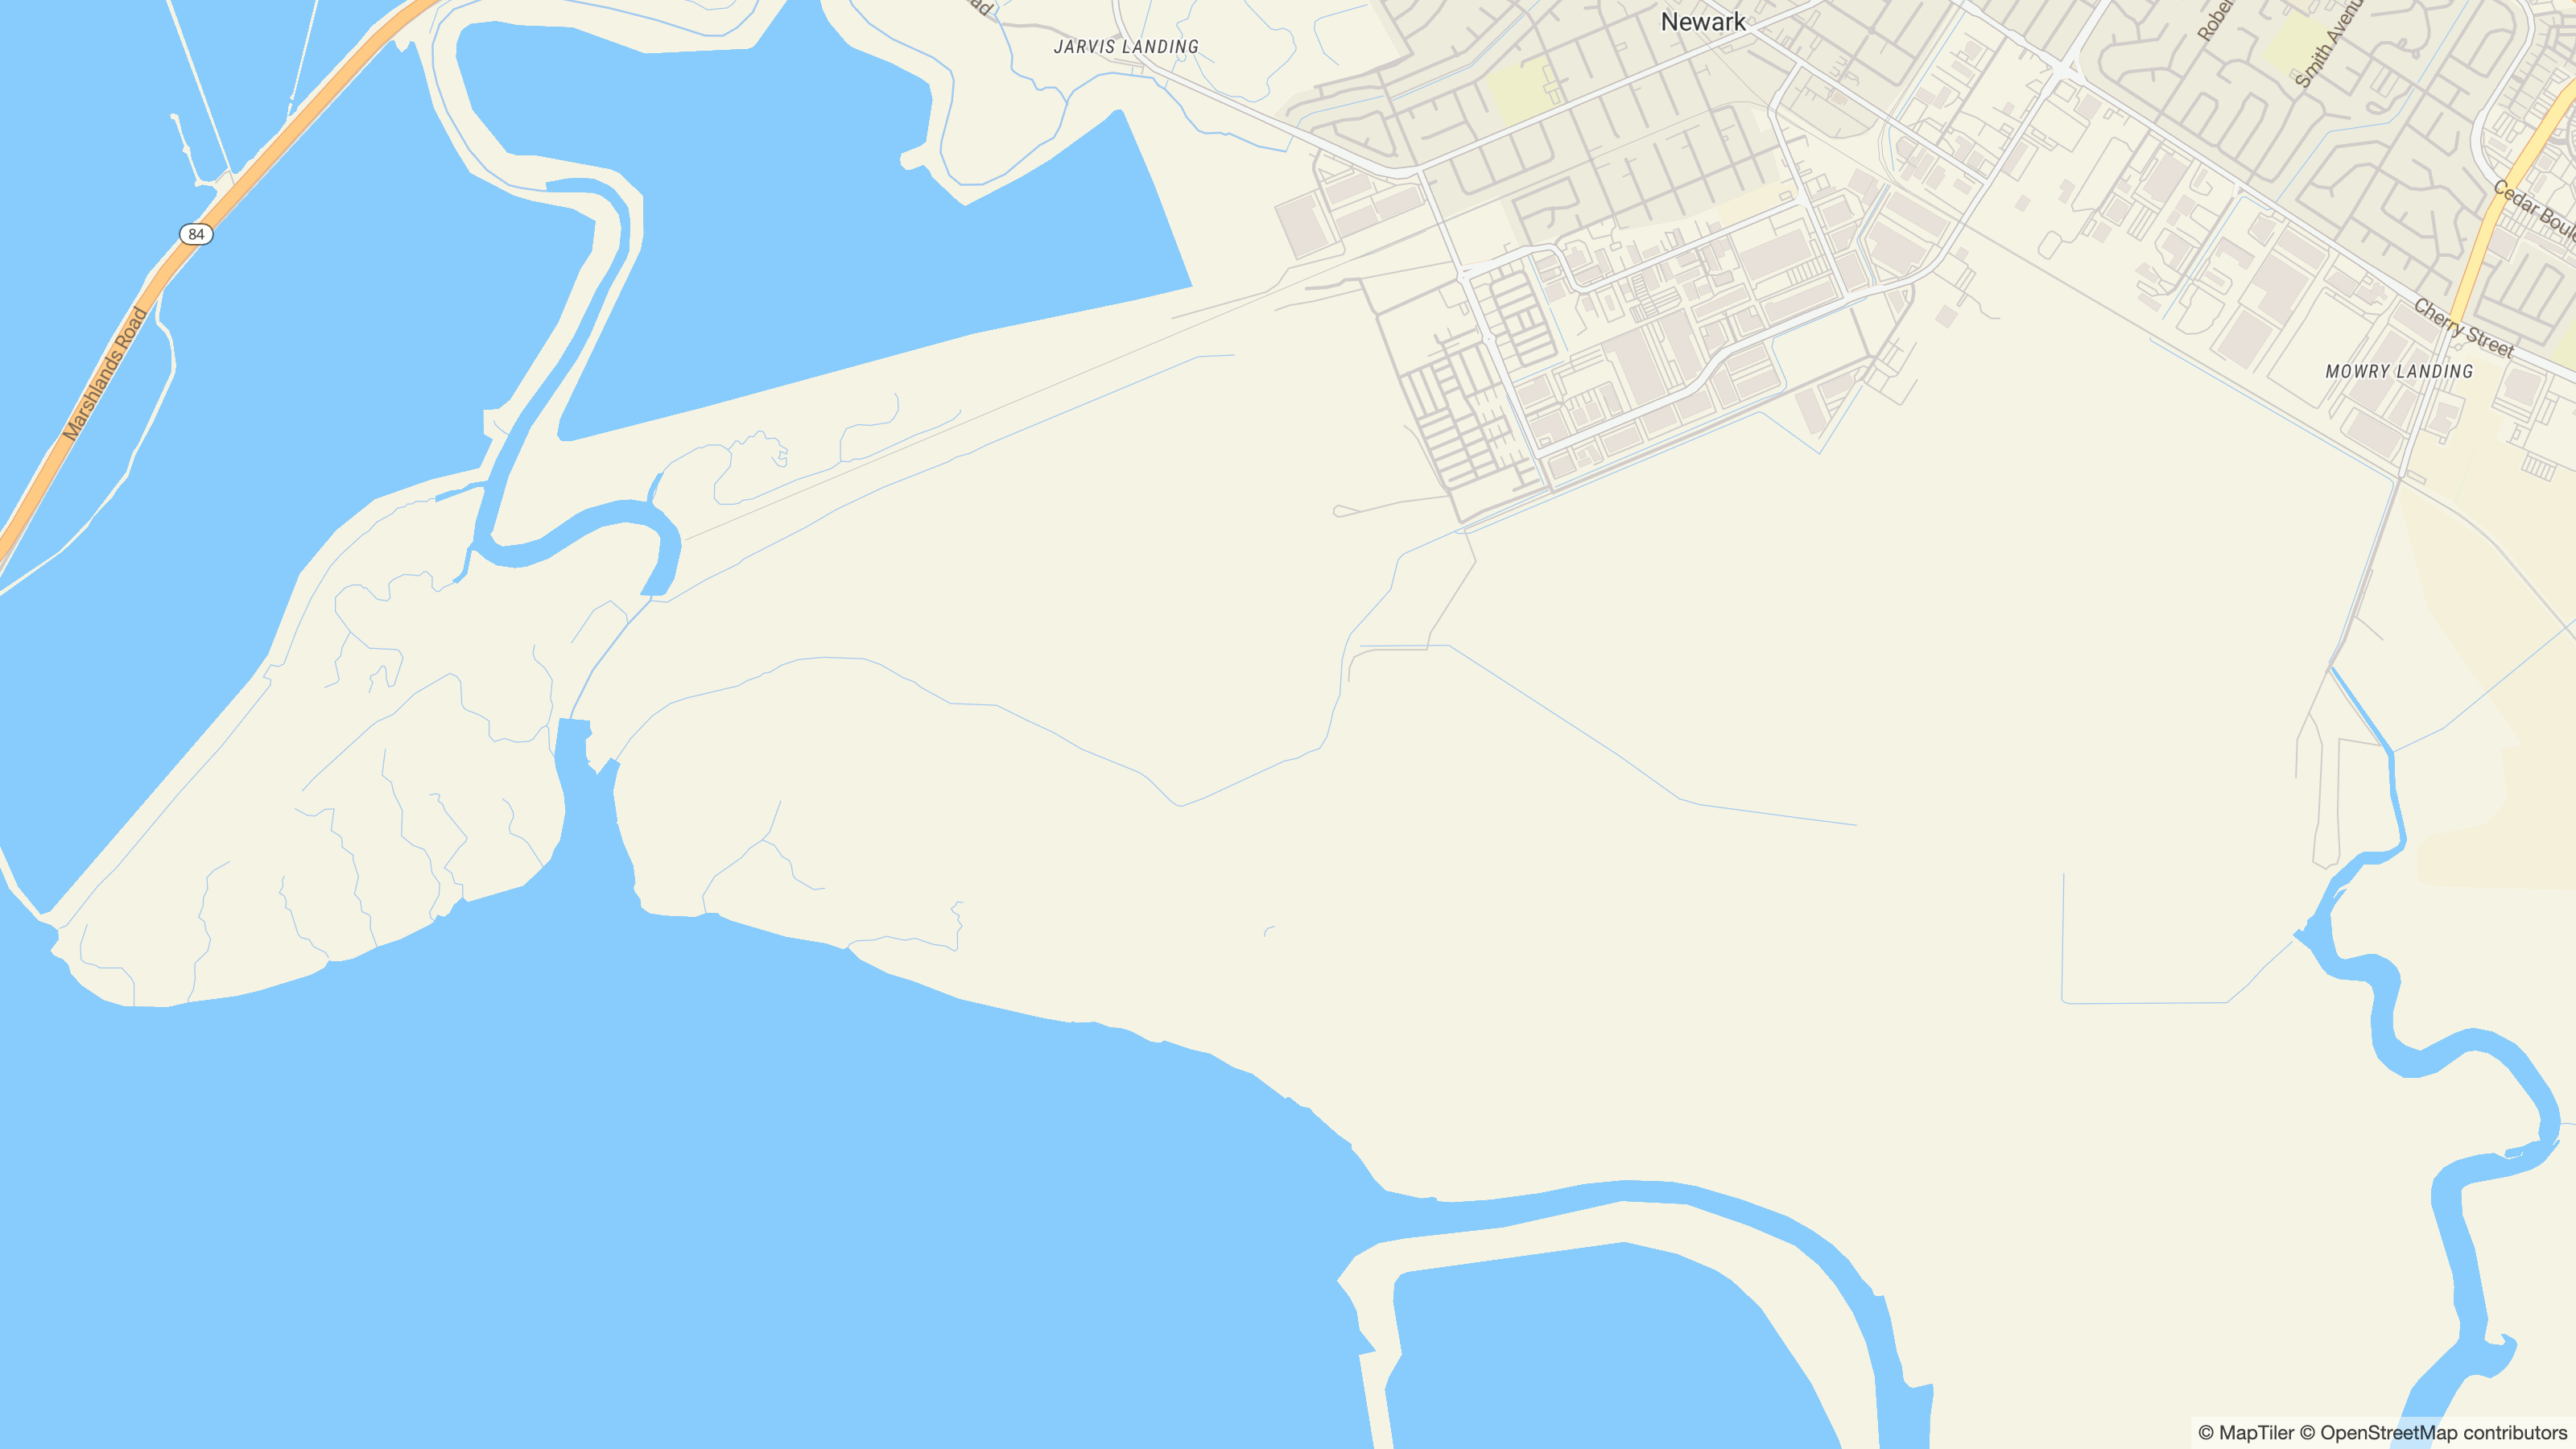 Salt ponds in the SF Bay Area are now visible in OpenMapTiles 3.12